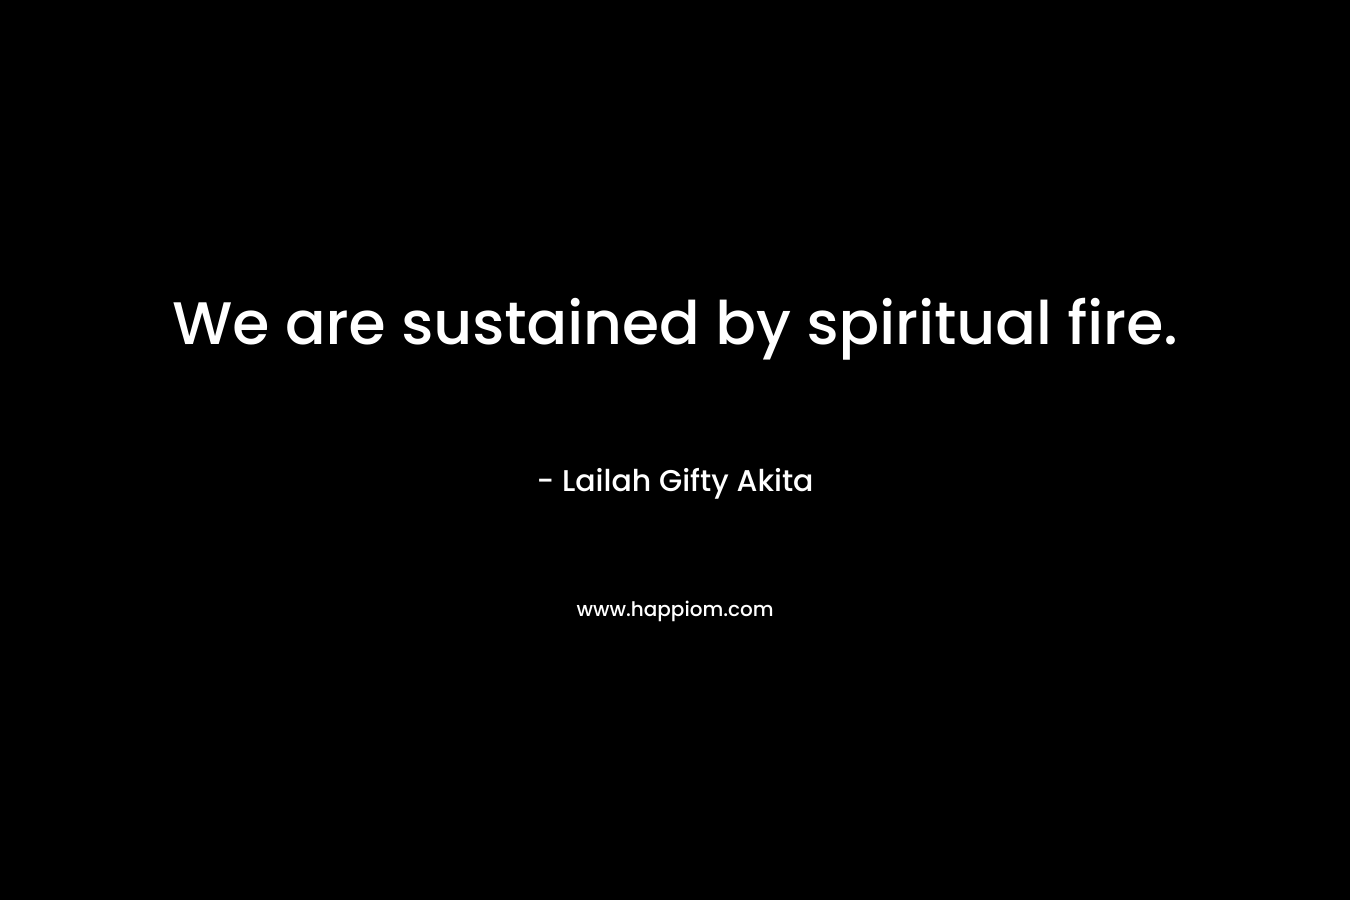 We are sustained by spiritual fire.